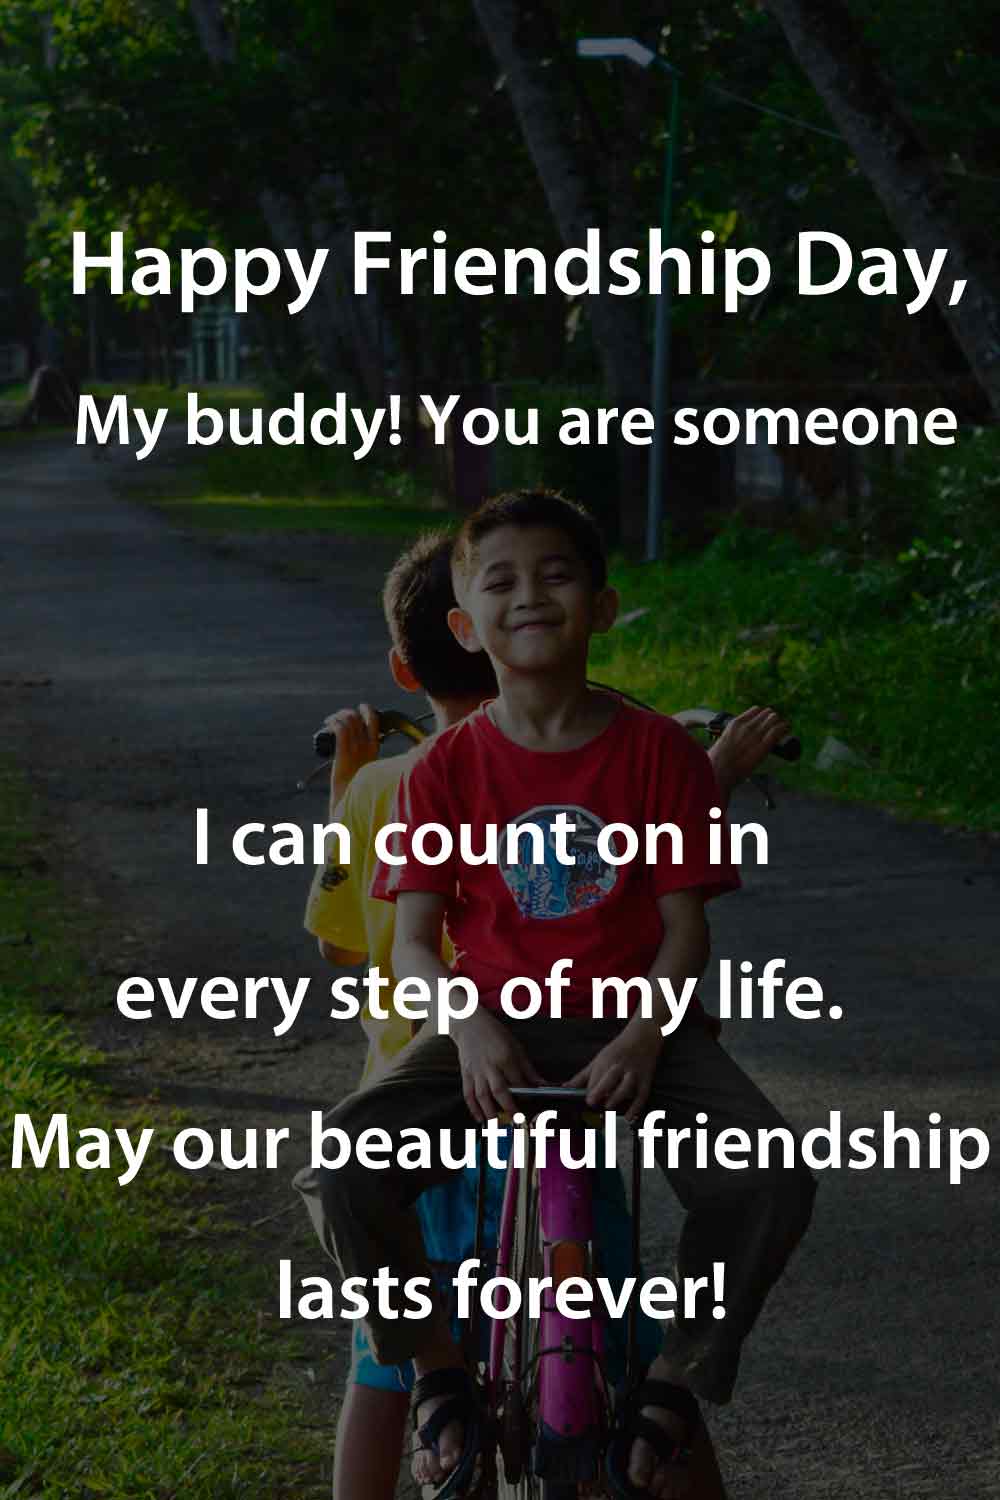 Friendship Day Wishes and Quotes - Well Quo